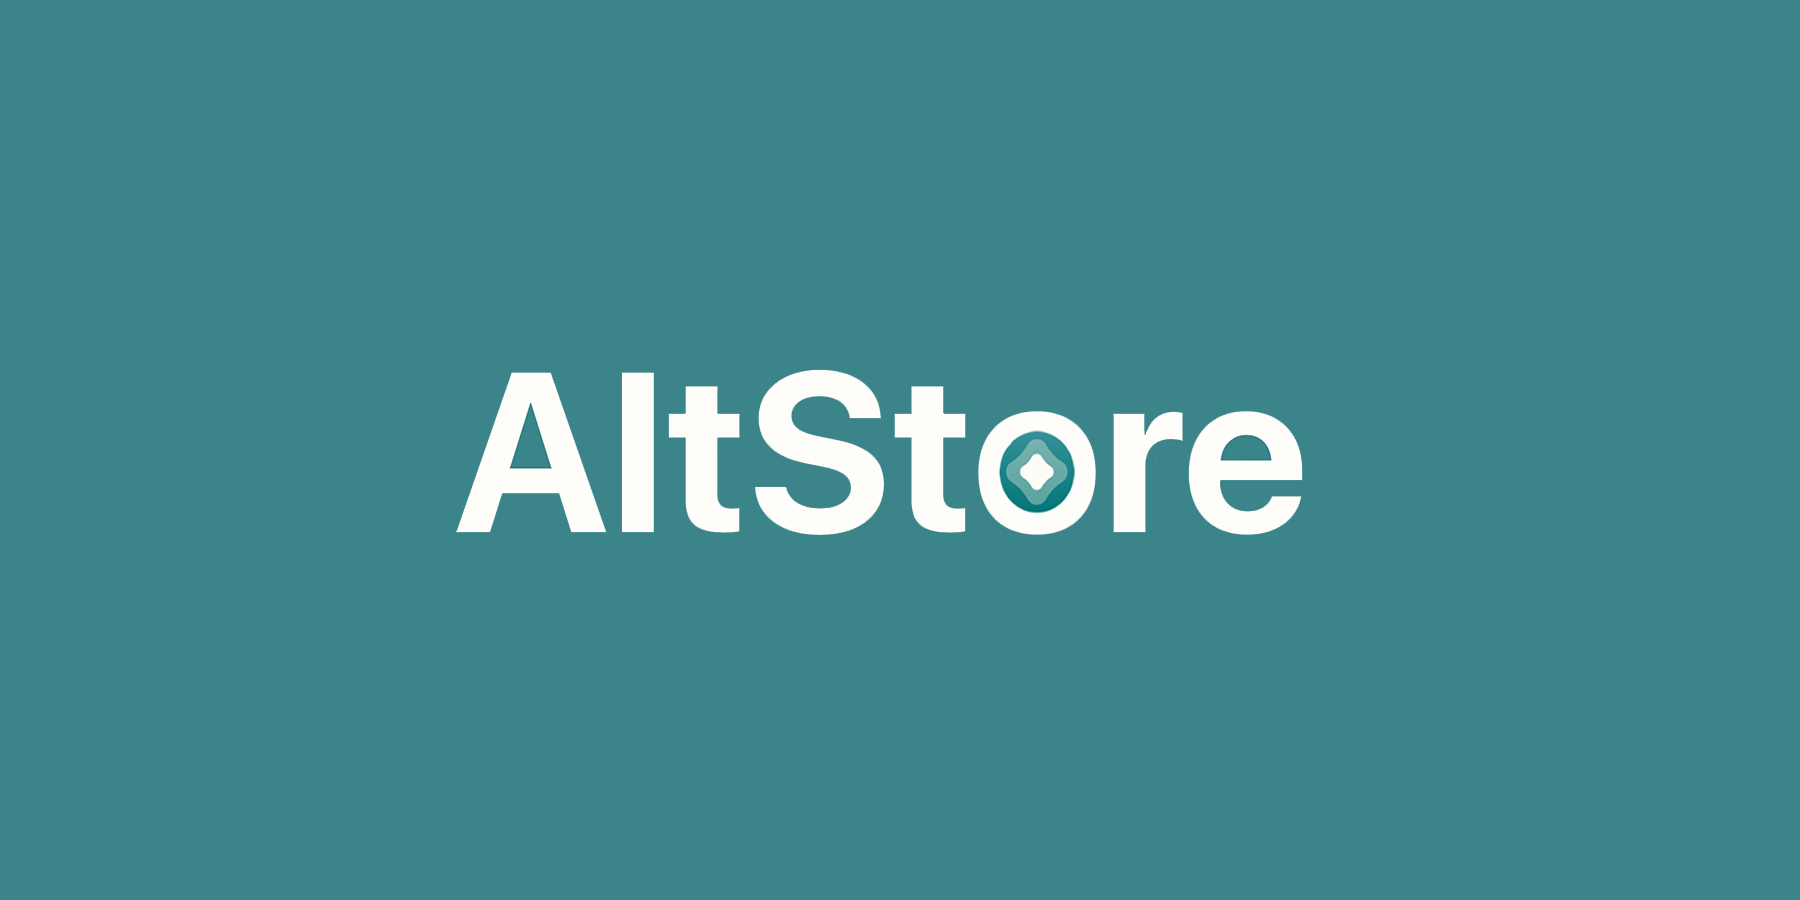 AltStore sideloading app for iOS updated to v1.6.3 with minor bug fixes